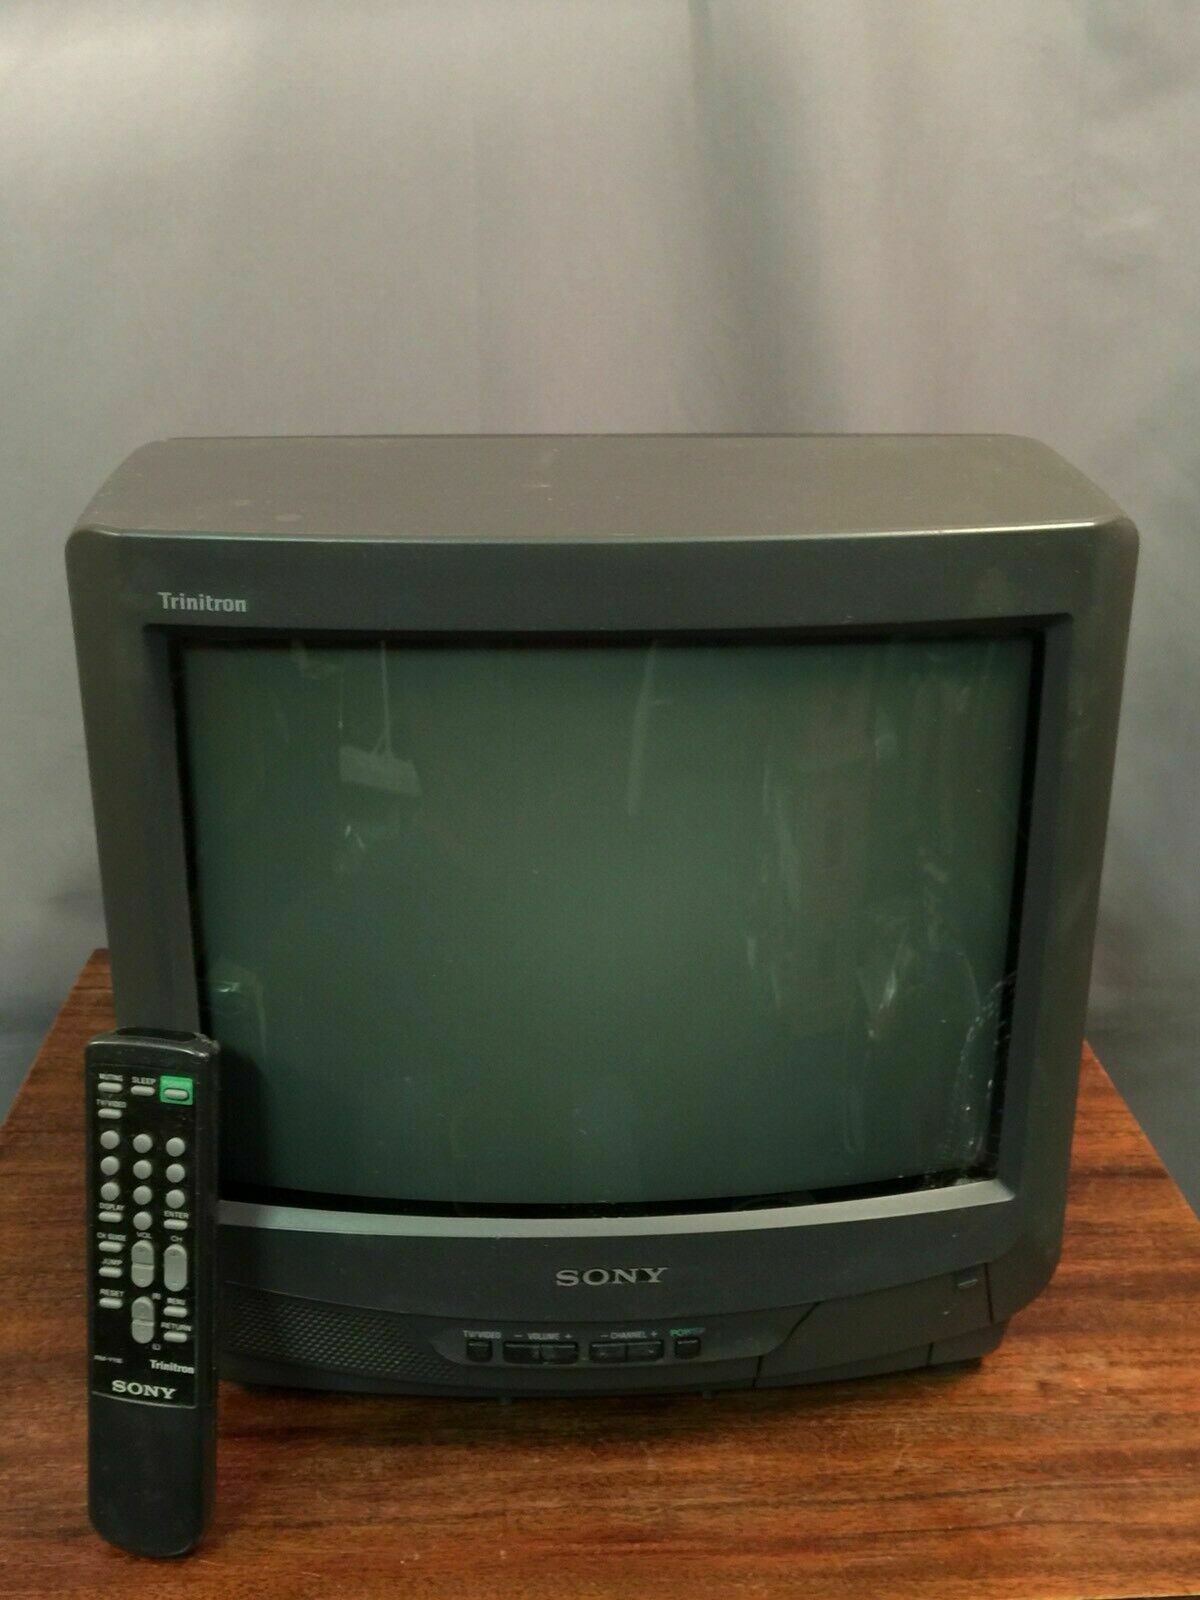 Sony Trinitron Tv Vintage Color Gamer Television With Remote Model